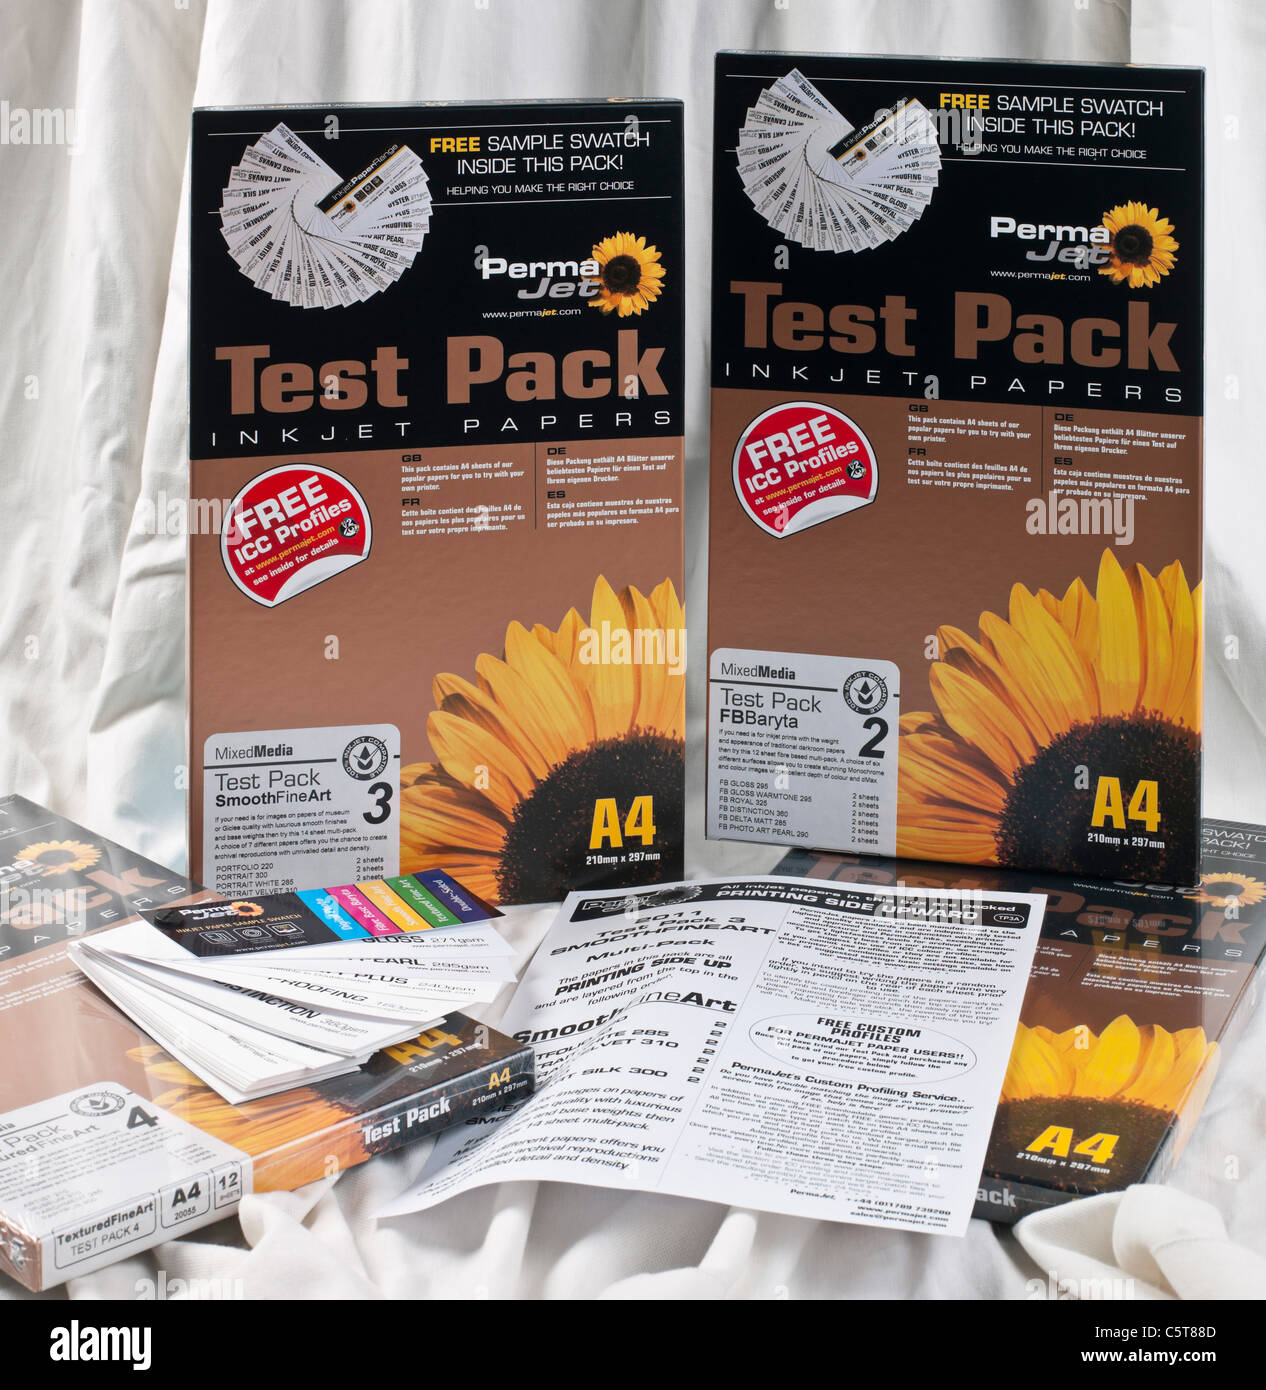 Permajet trial inkjet paper packs, UK, with paper surface swatches Stock Photo